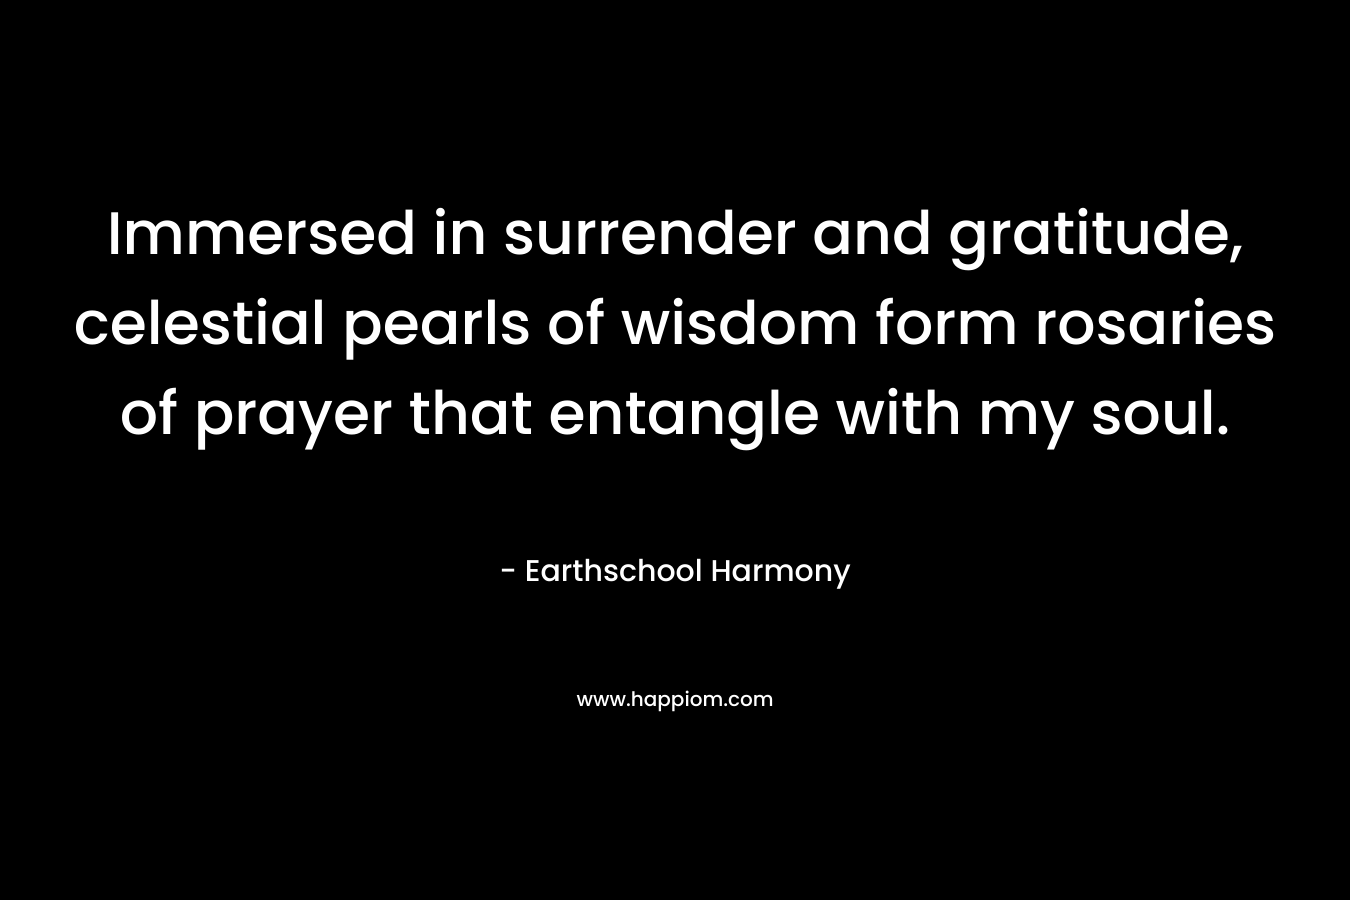 Immersed in surrender and gratitude, celestial pearls of wisdom form rosaries of prayer that entangle with my soul. – Earthschool Harmony